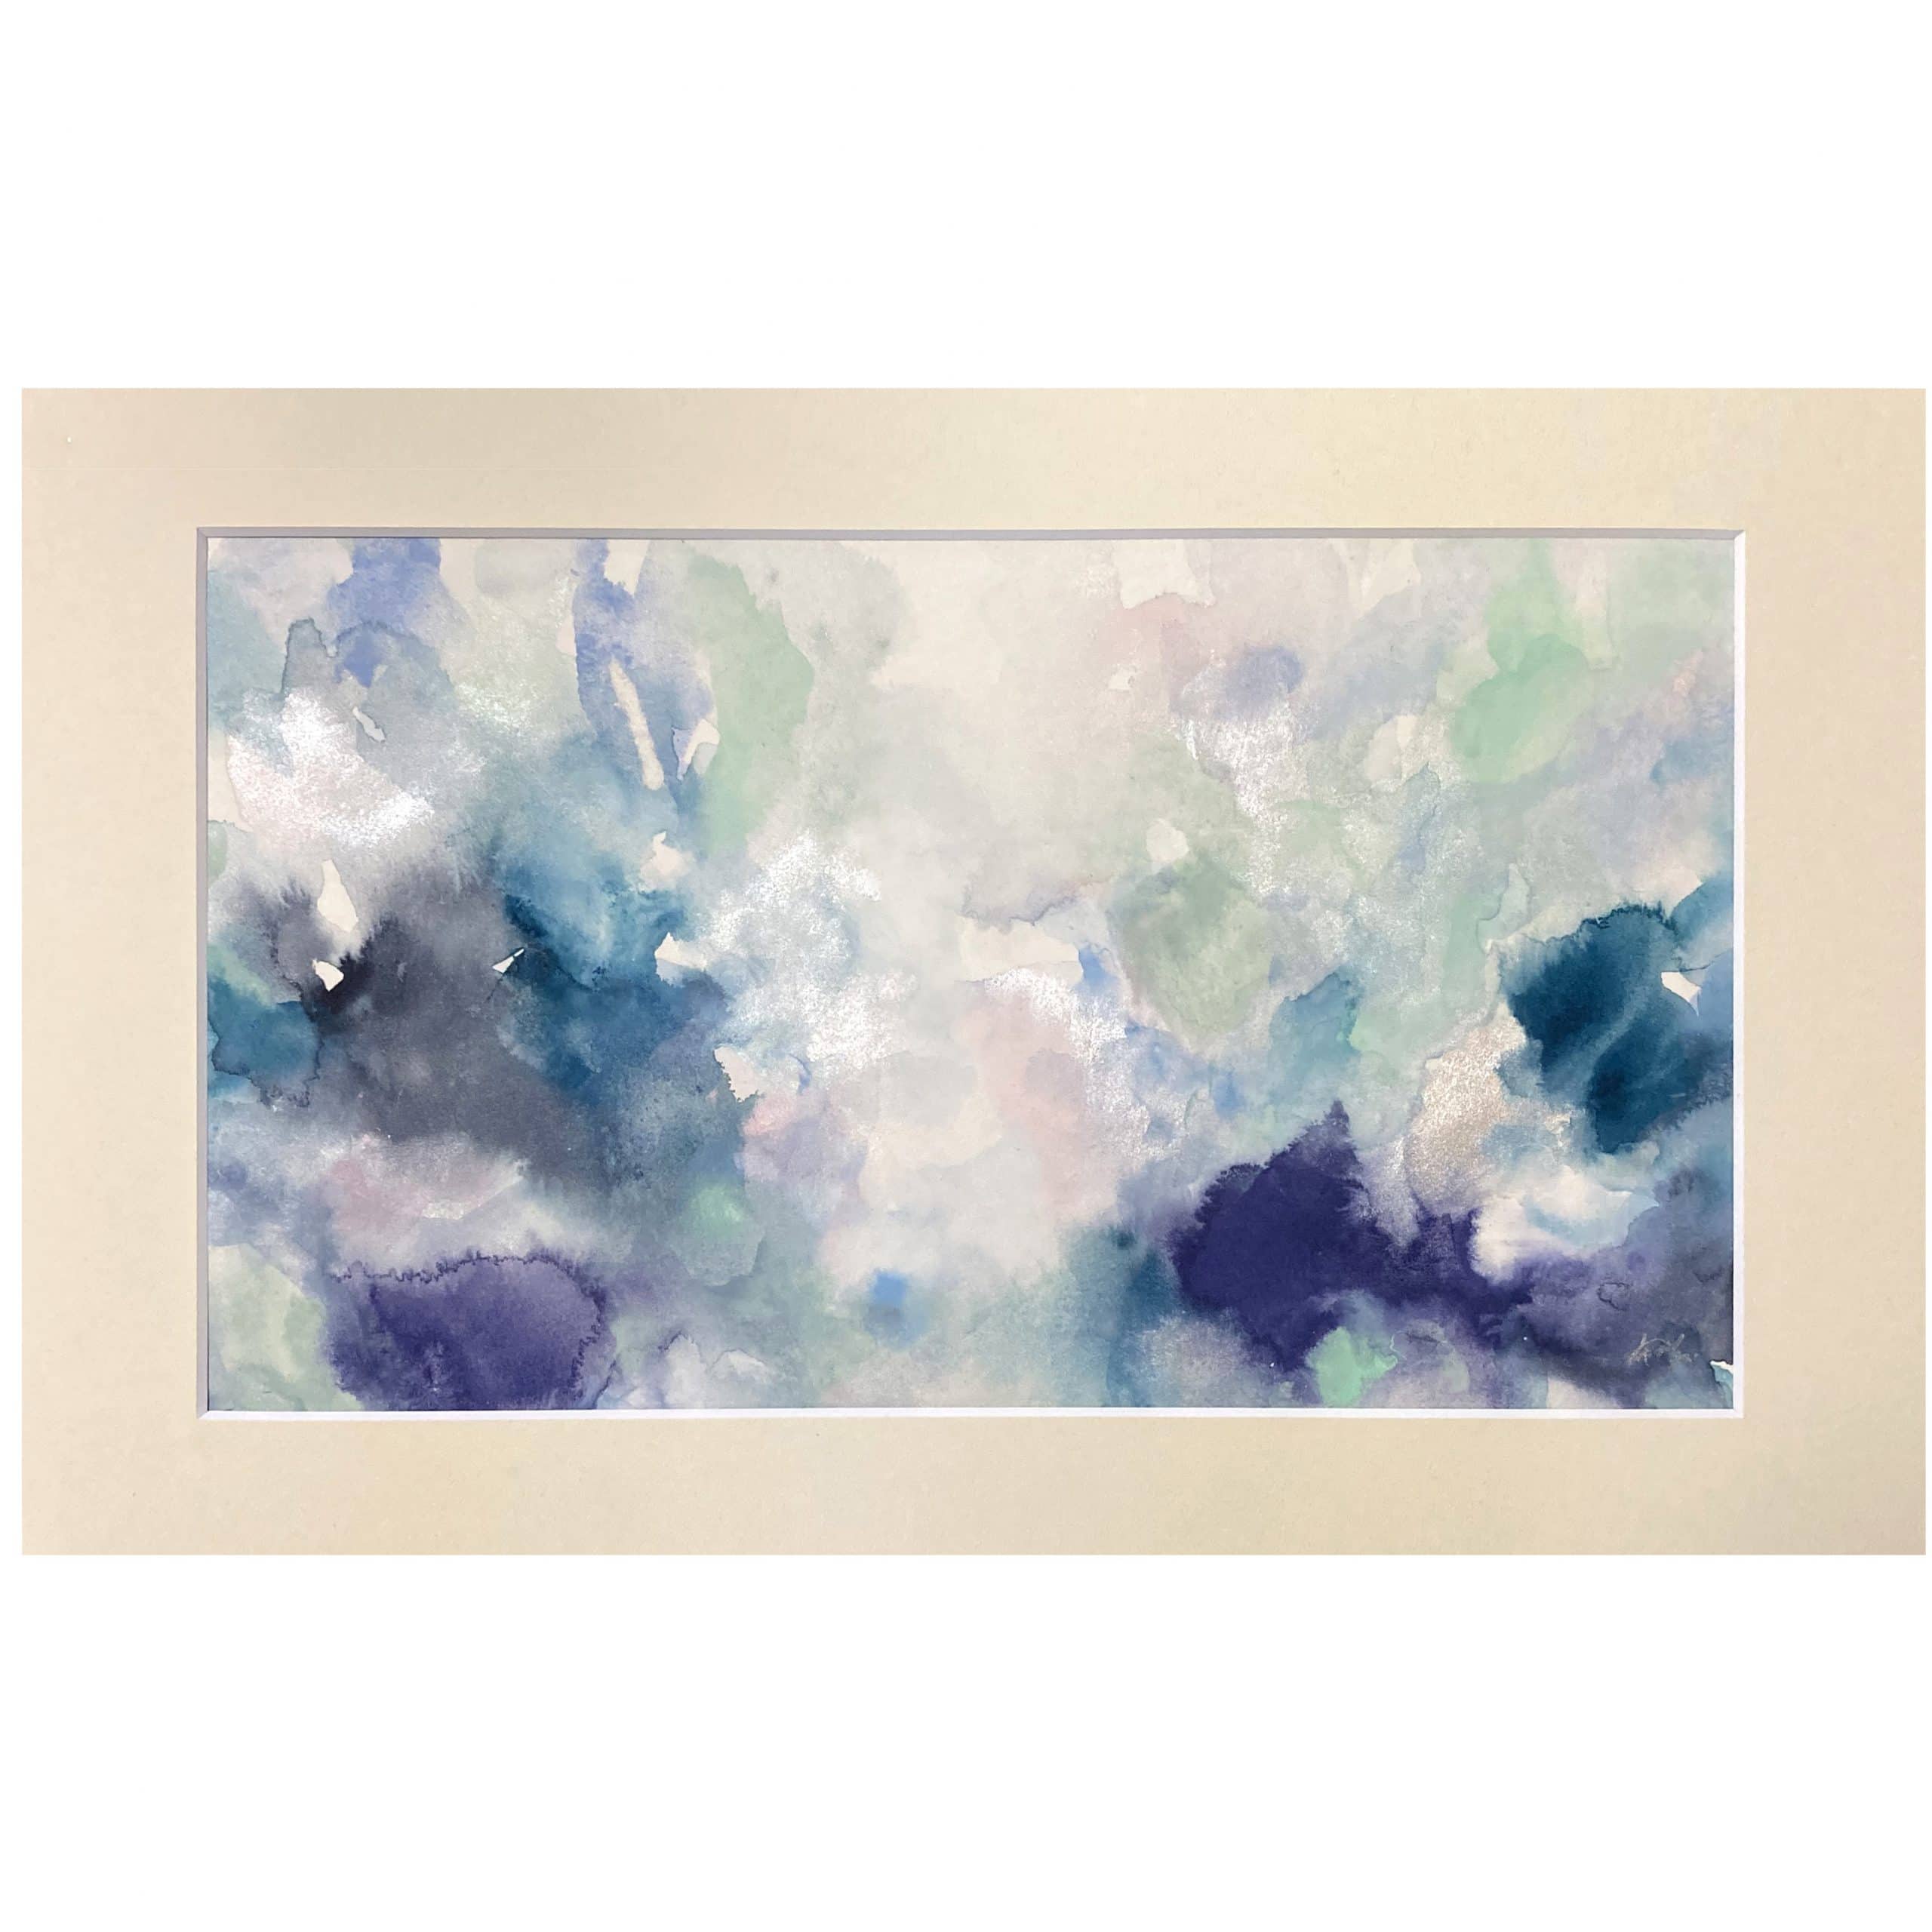 Custom made color painting /delivered in Jun 2020